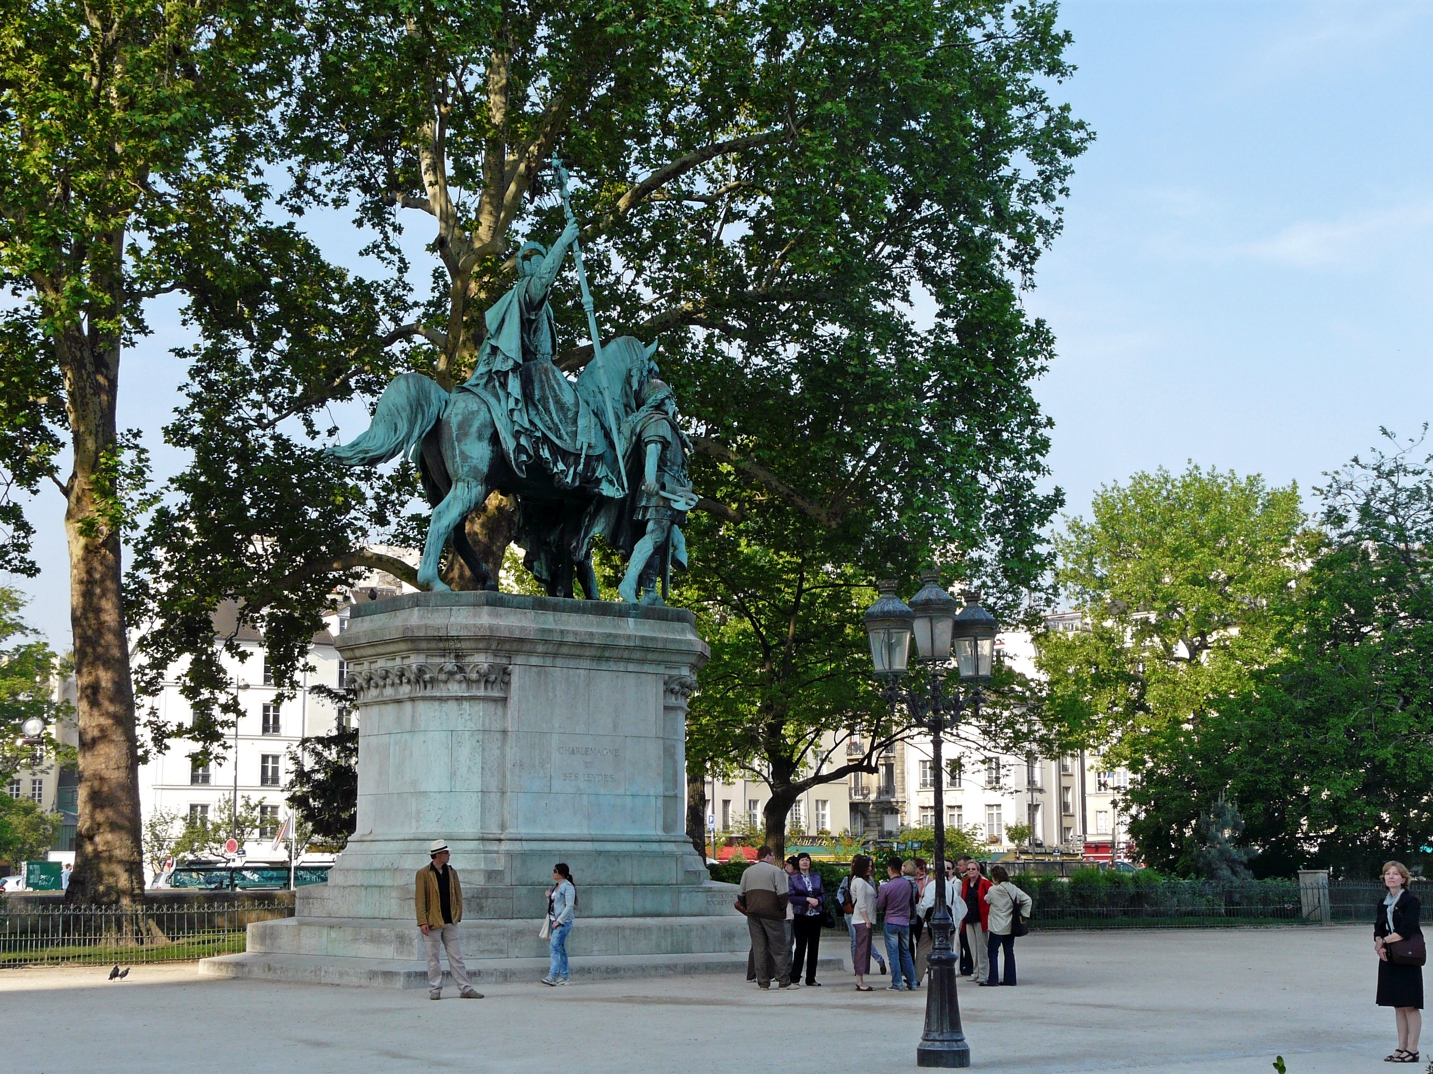 Equestrian statue of Charles the Great in Paris France